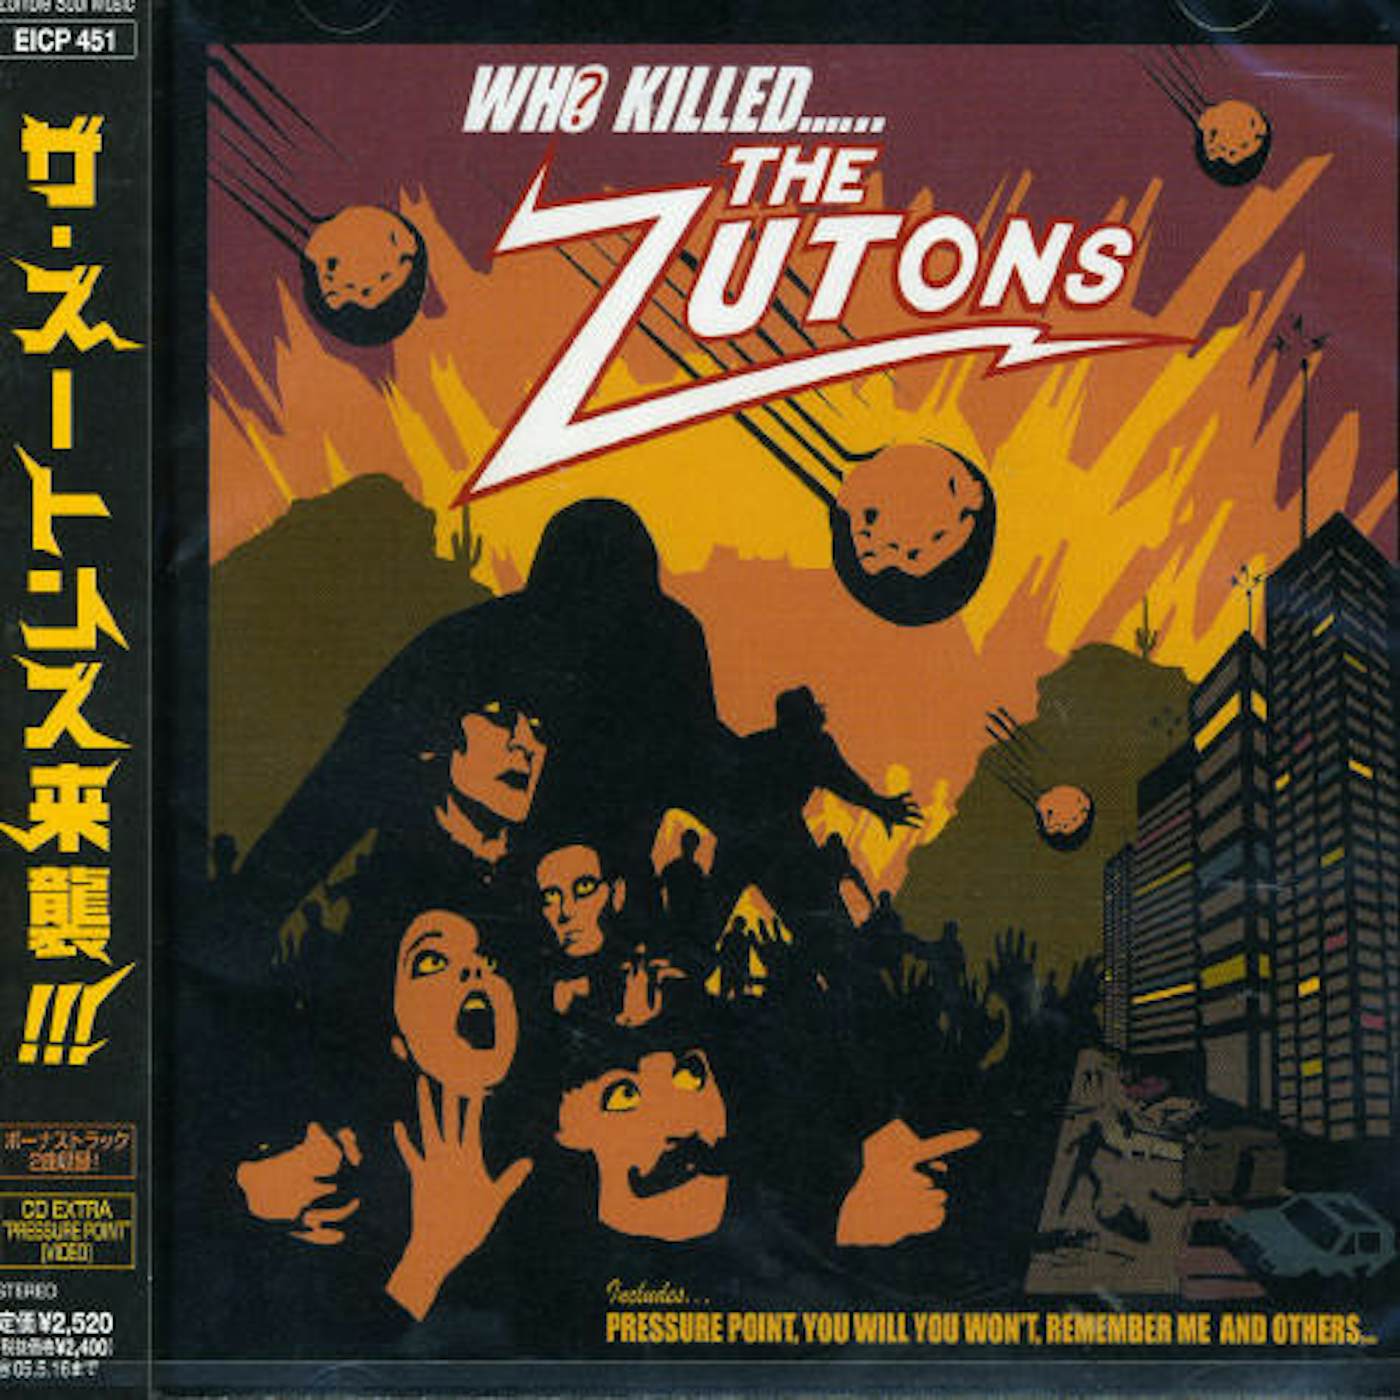 WHO KILLED The Zutons? CD